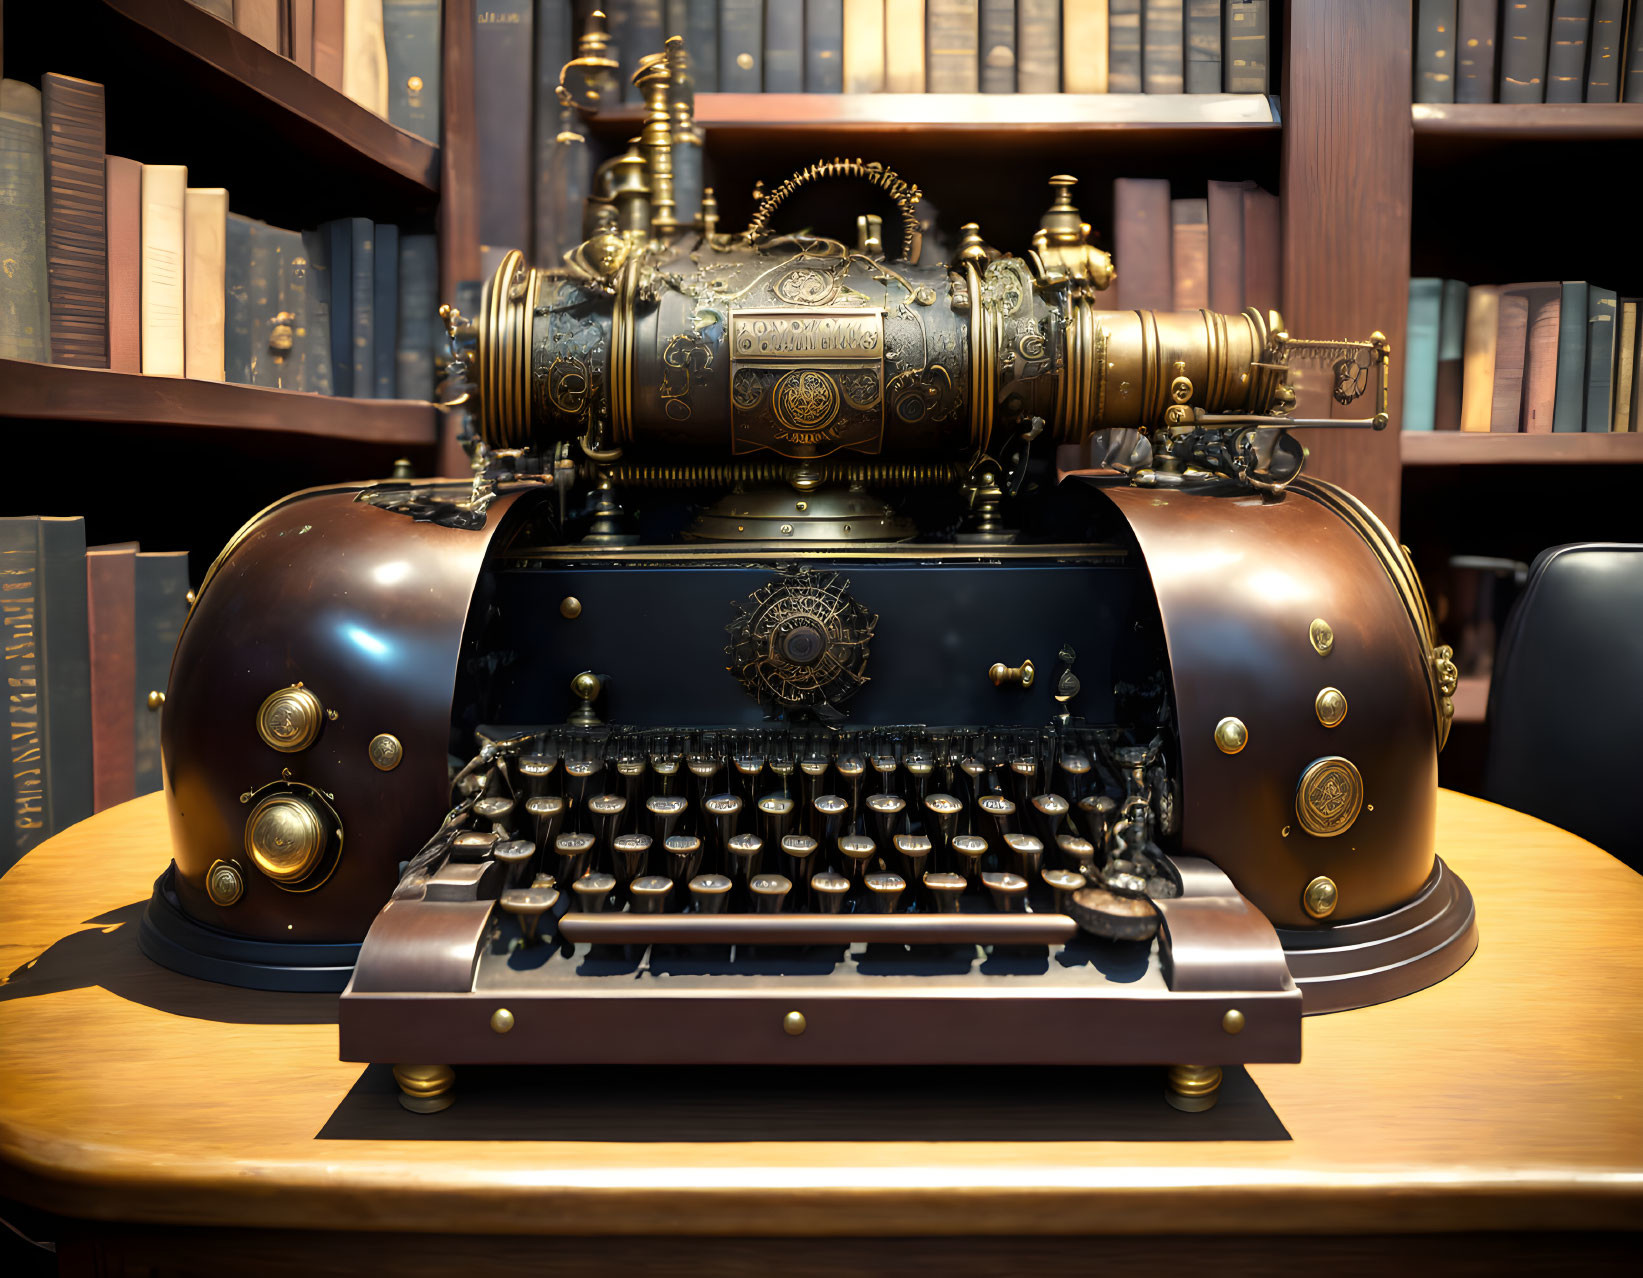 An old steampunk typing machine in an old bookshop